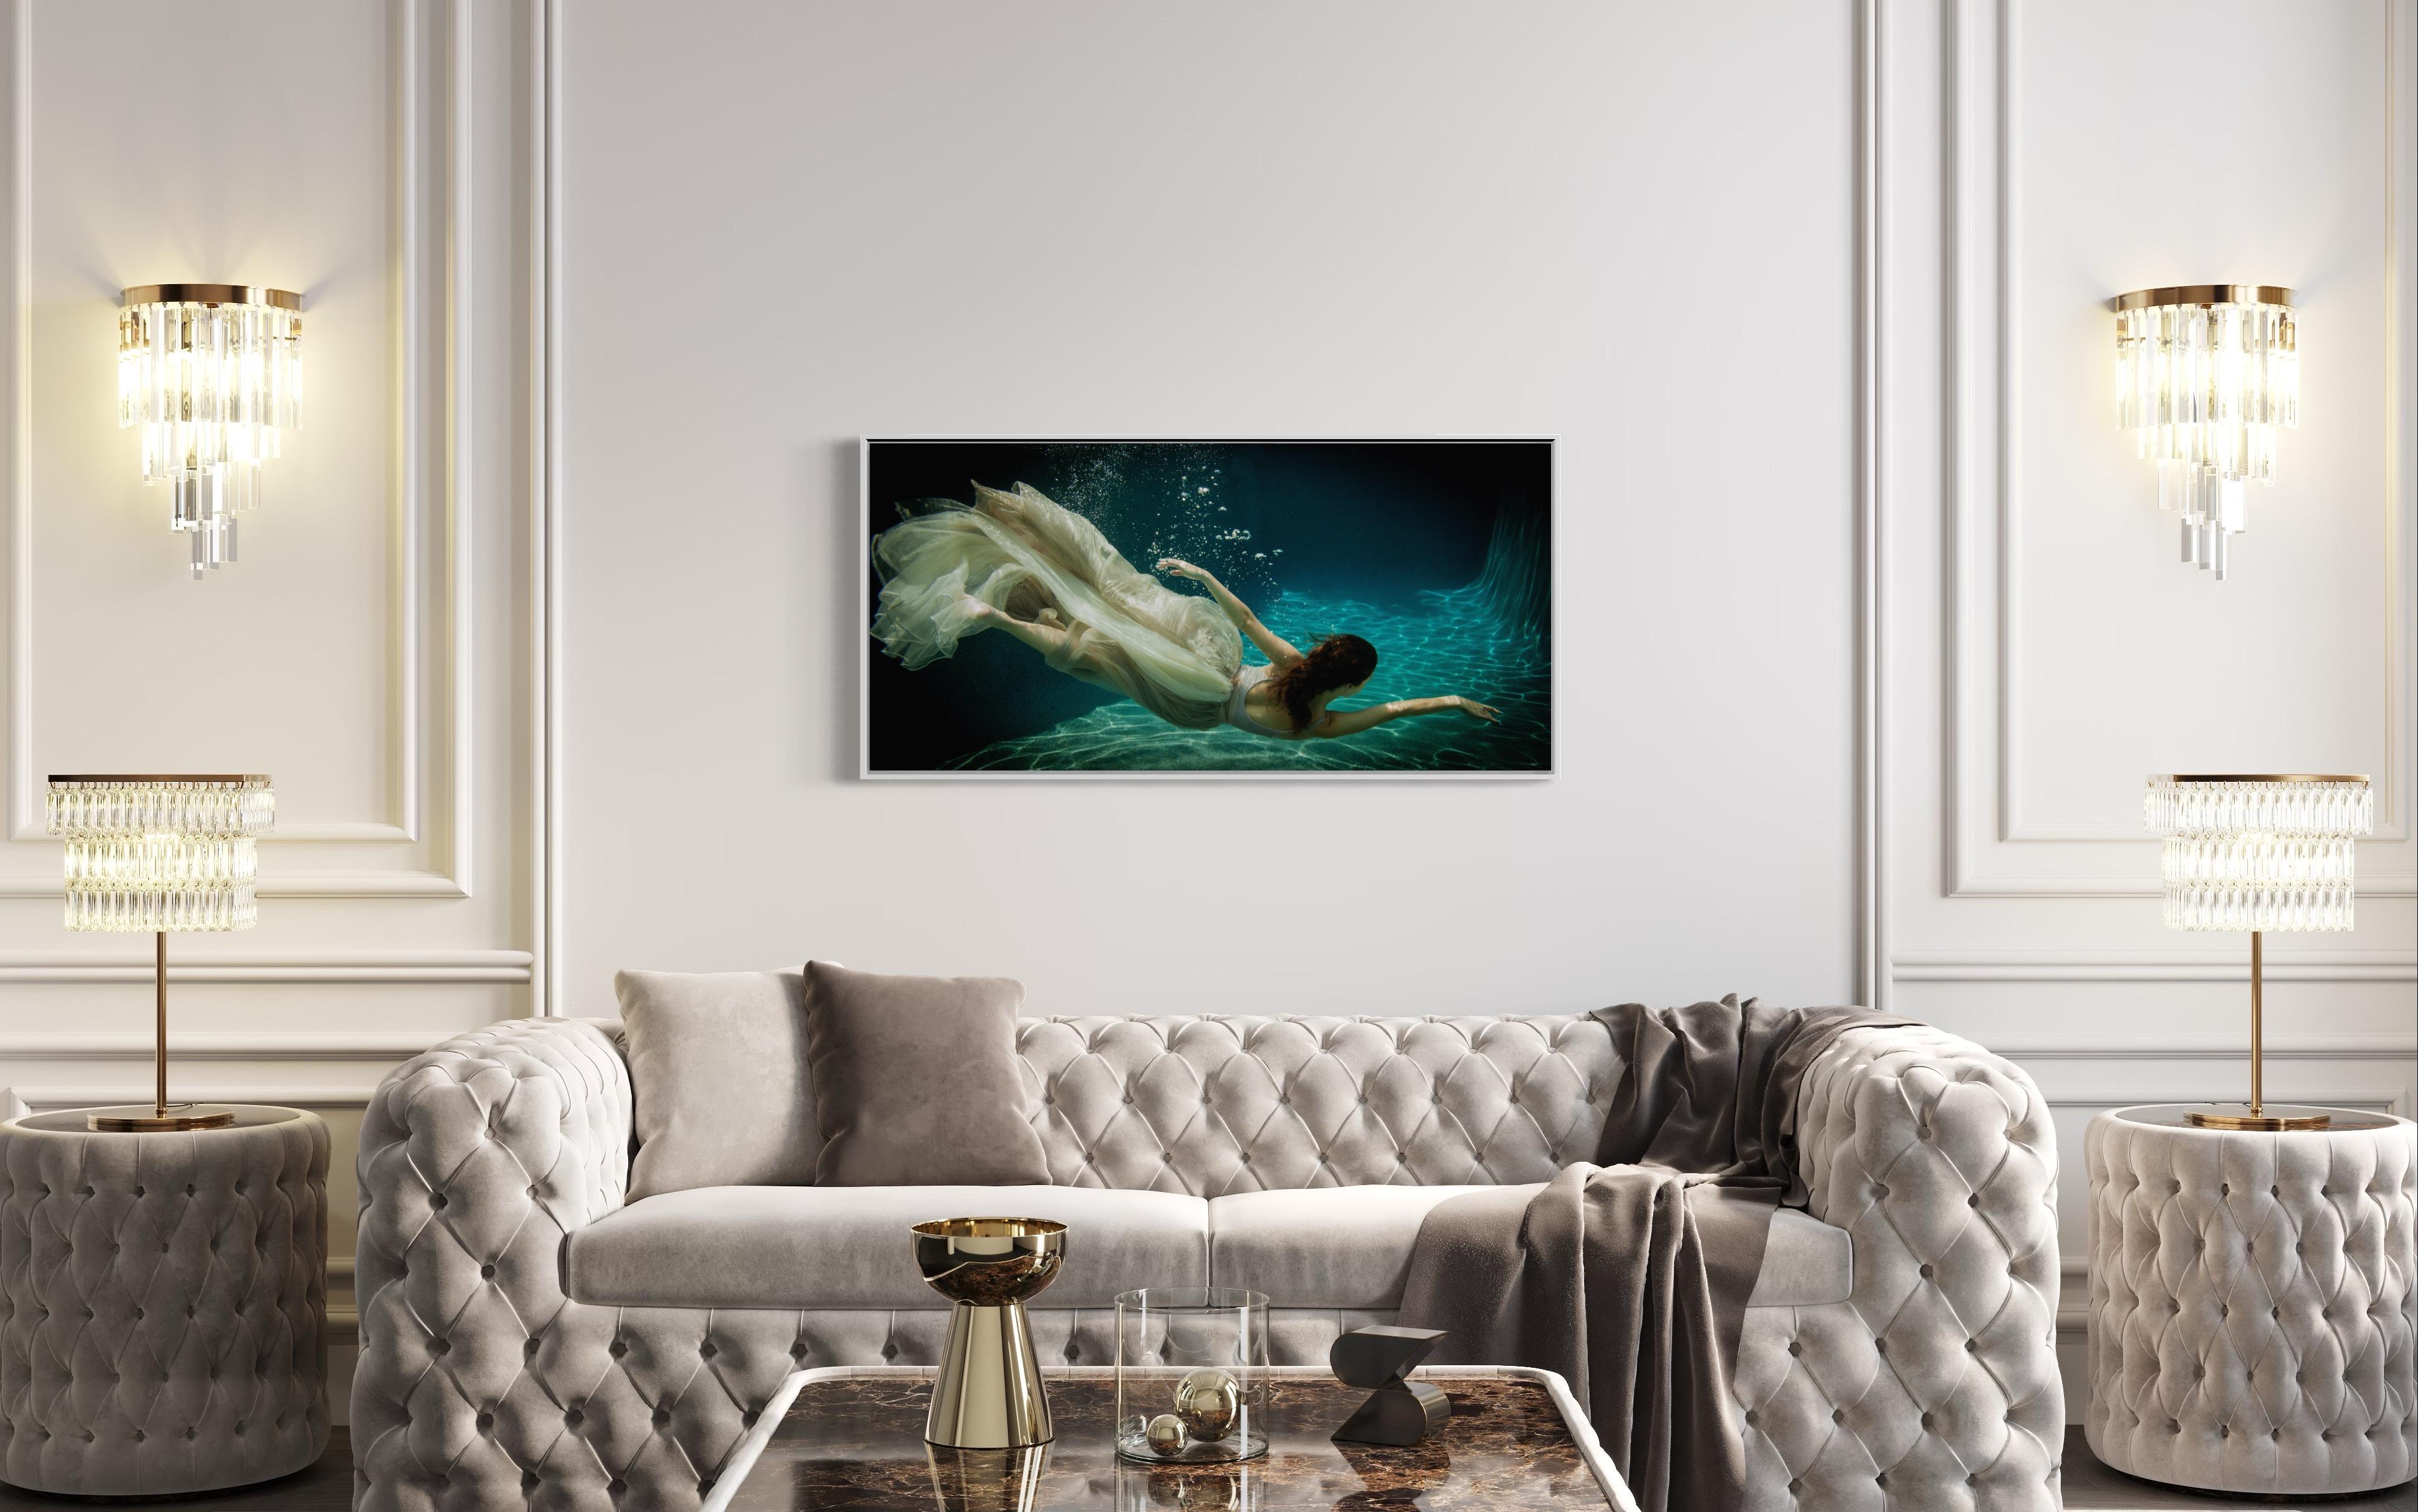 This contemporary figural limited edition photograph by Alyssa Fortin captures a female figure, wearing a dress made of light, soft fabric, swimming through water in an almost dancer-like fashion. The warm neutral tones of the figure and her dress